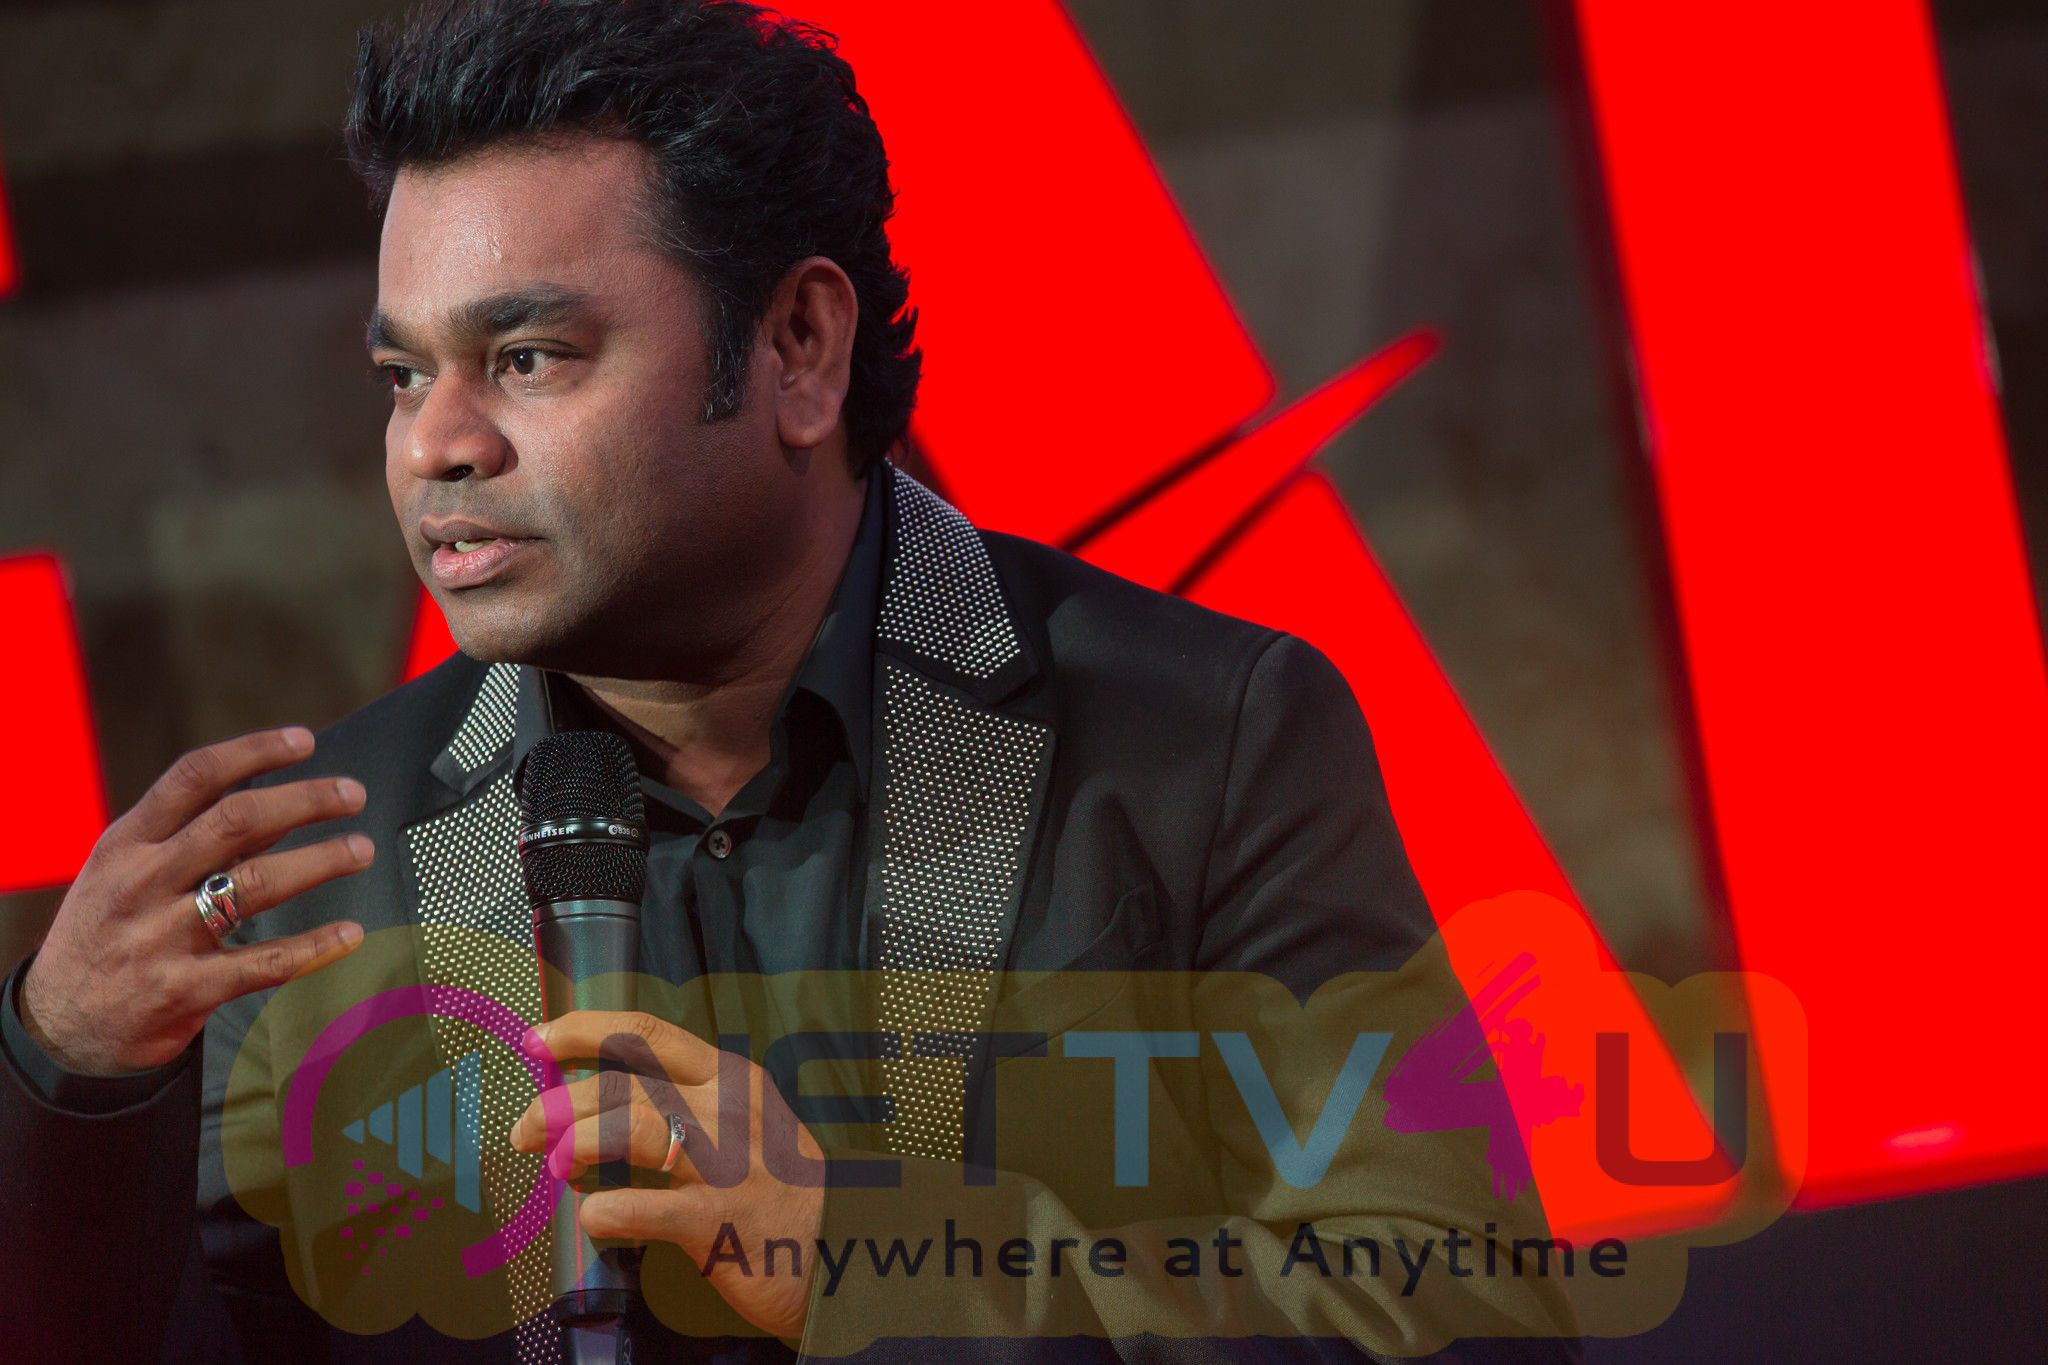 Marvelous Photos Of AR Rahman Launches Ideal Entertainment Production Company, 99 Songs (Film) And His Directorial Debut Le Musk